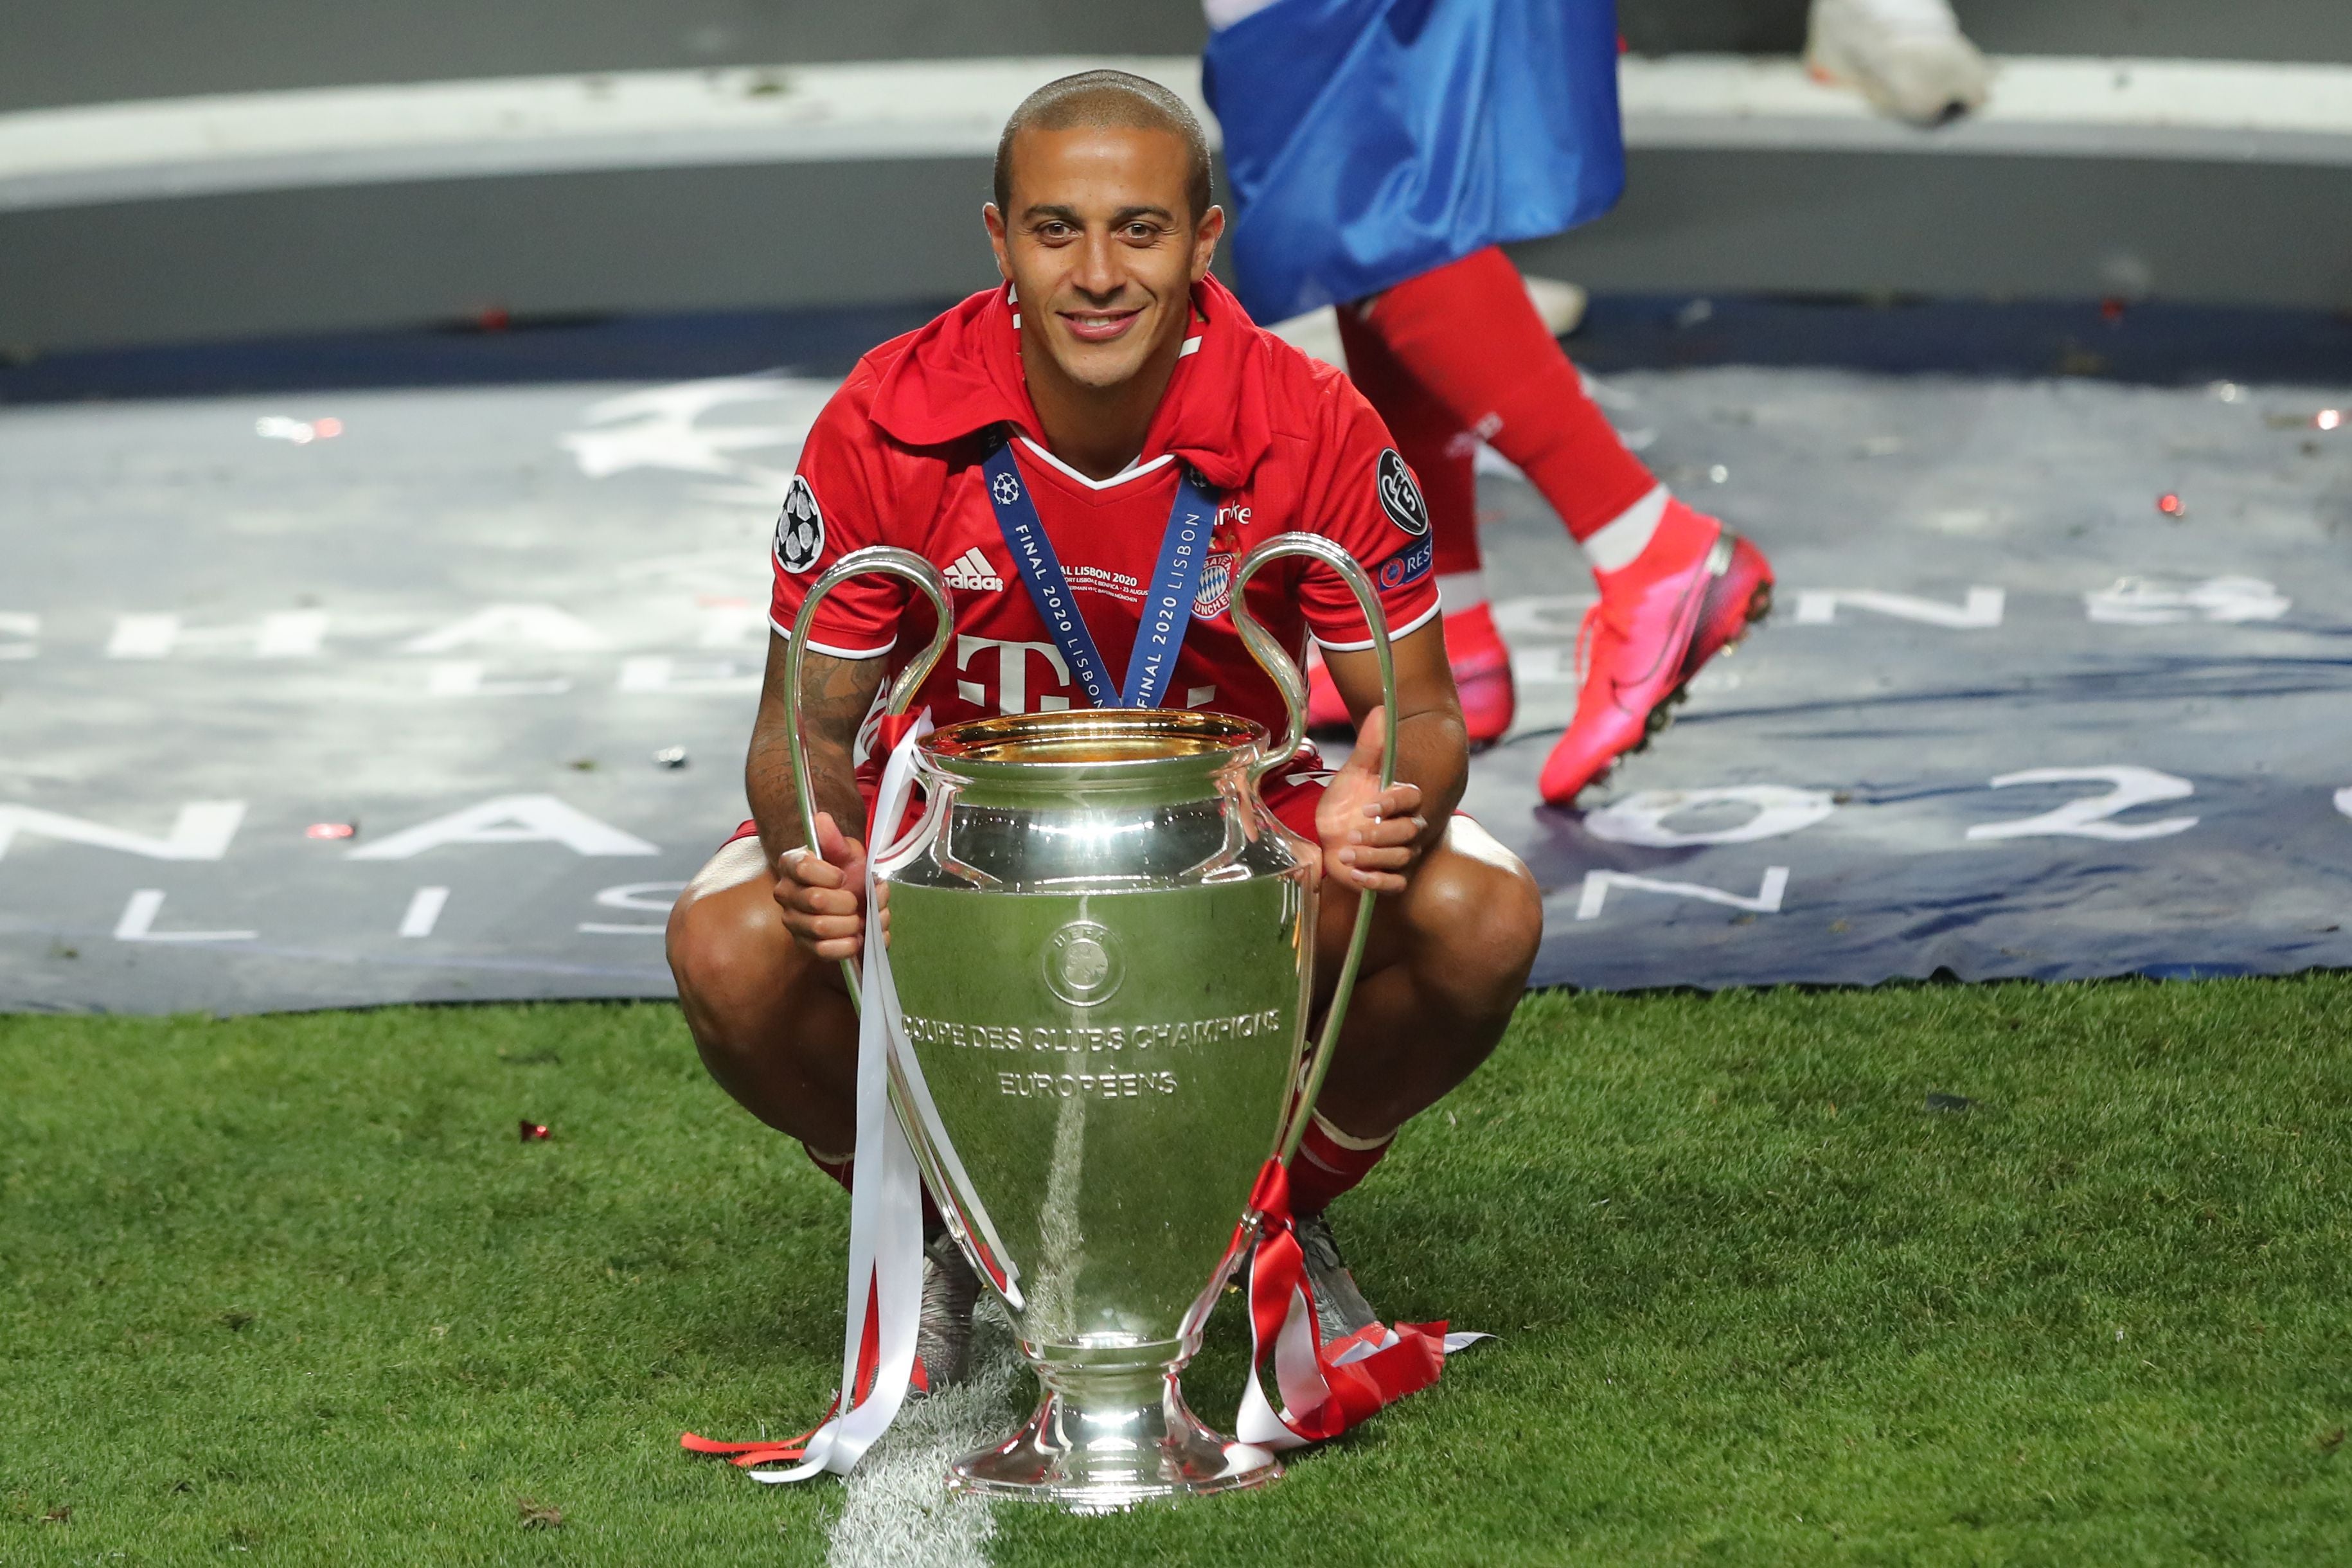 Thiago won the Champions League on his final appearance for Bayern Munich before joining Liverpool